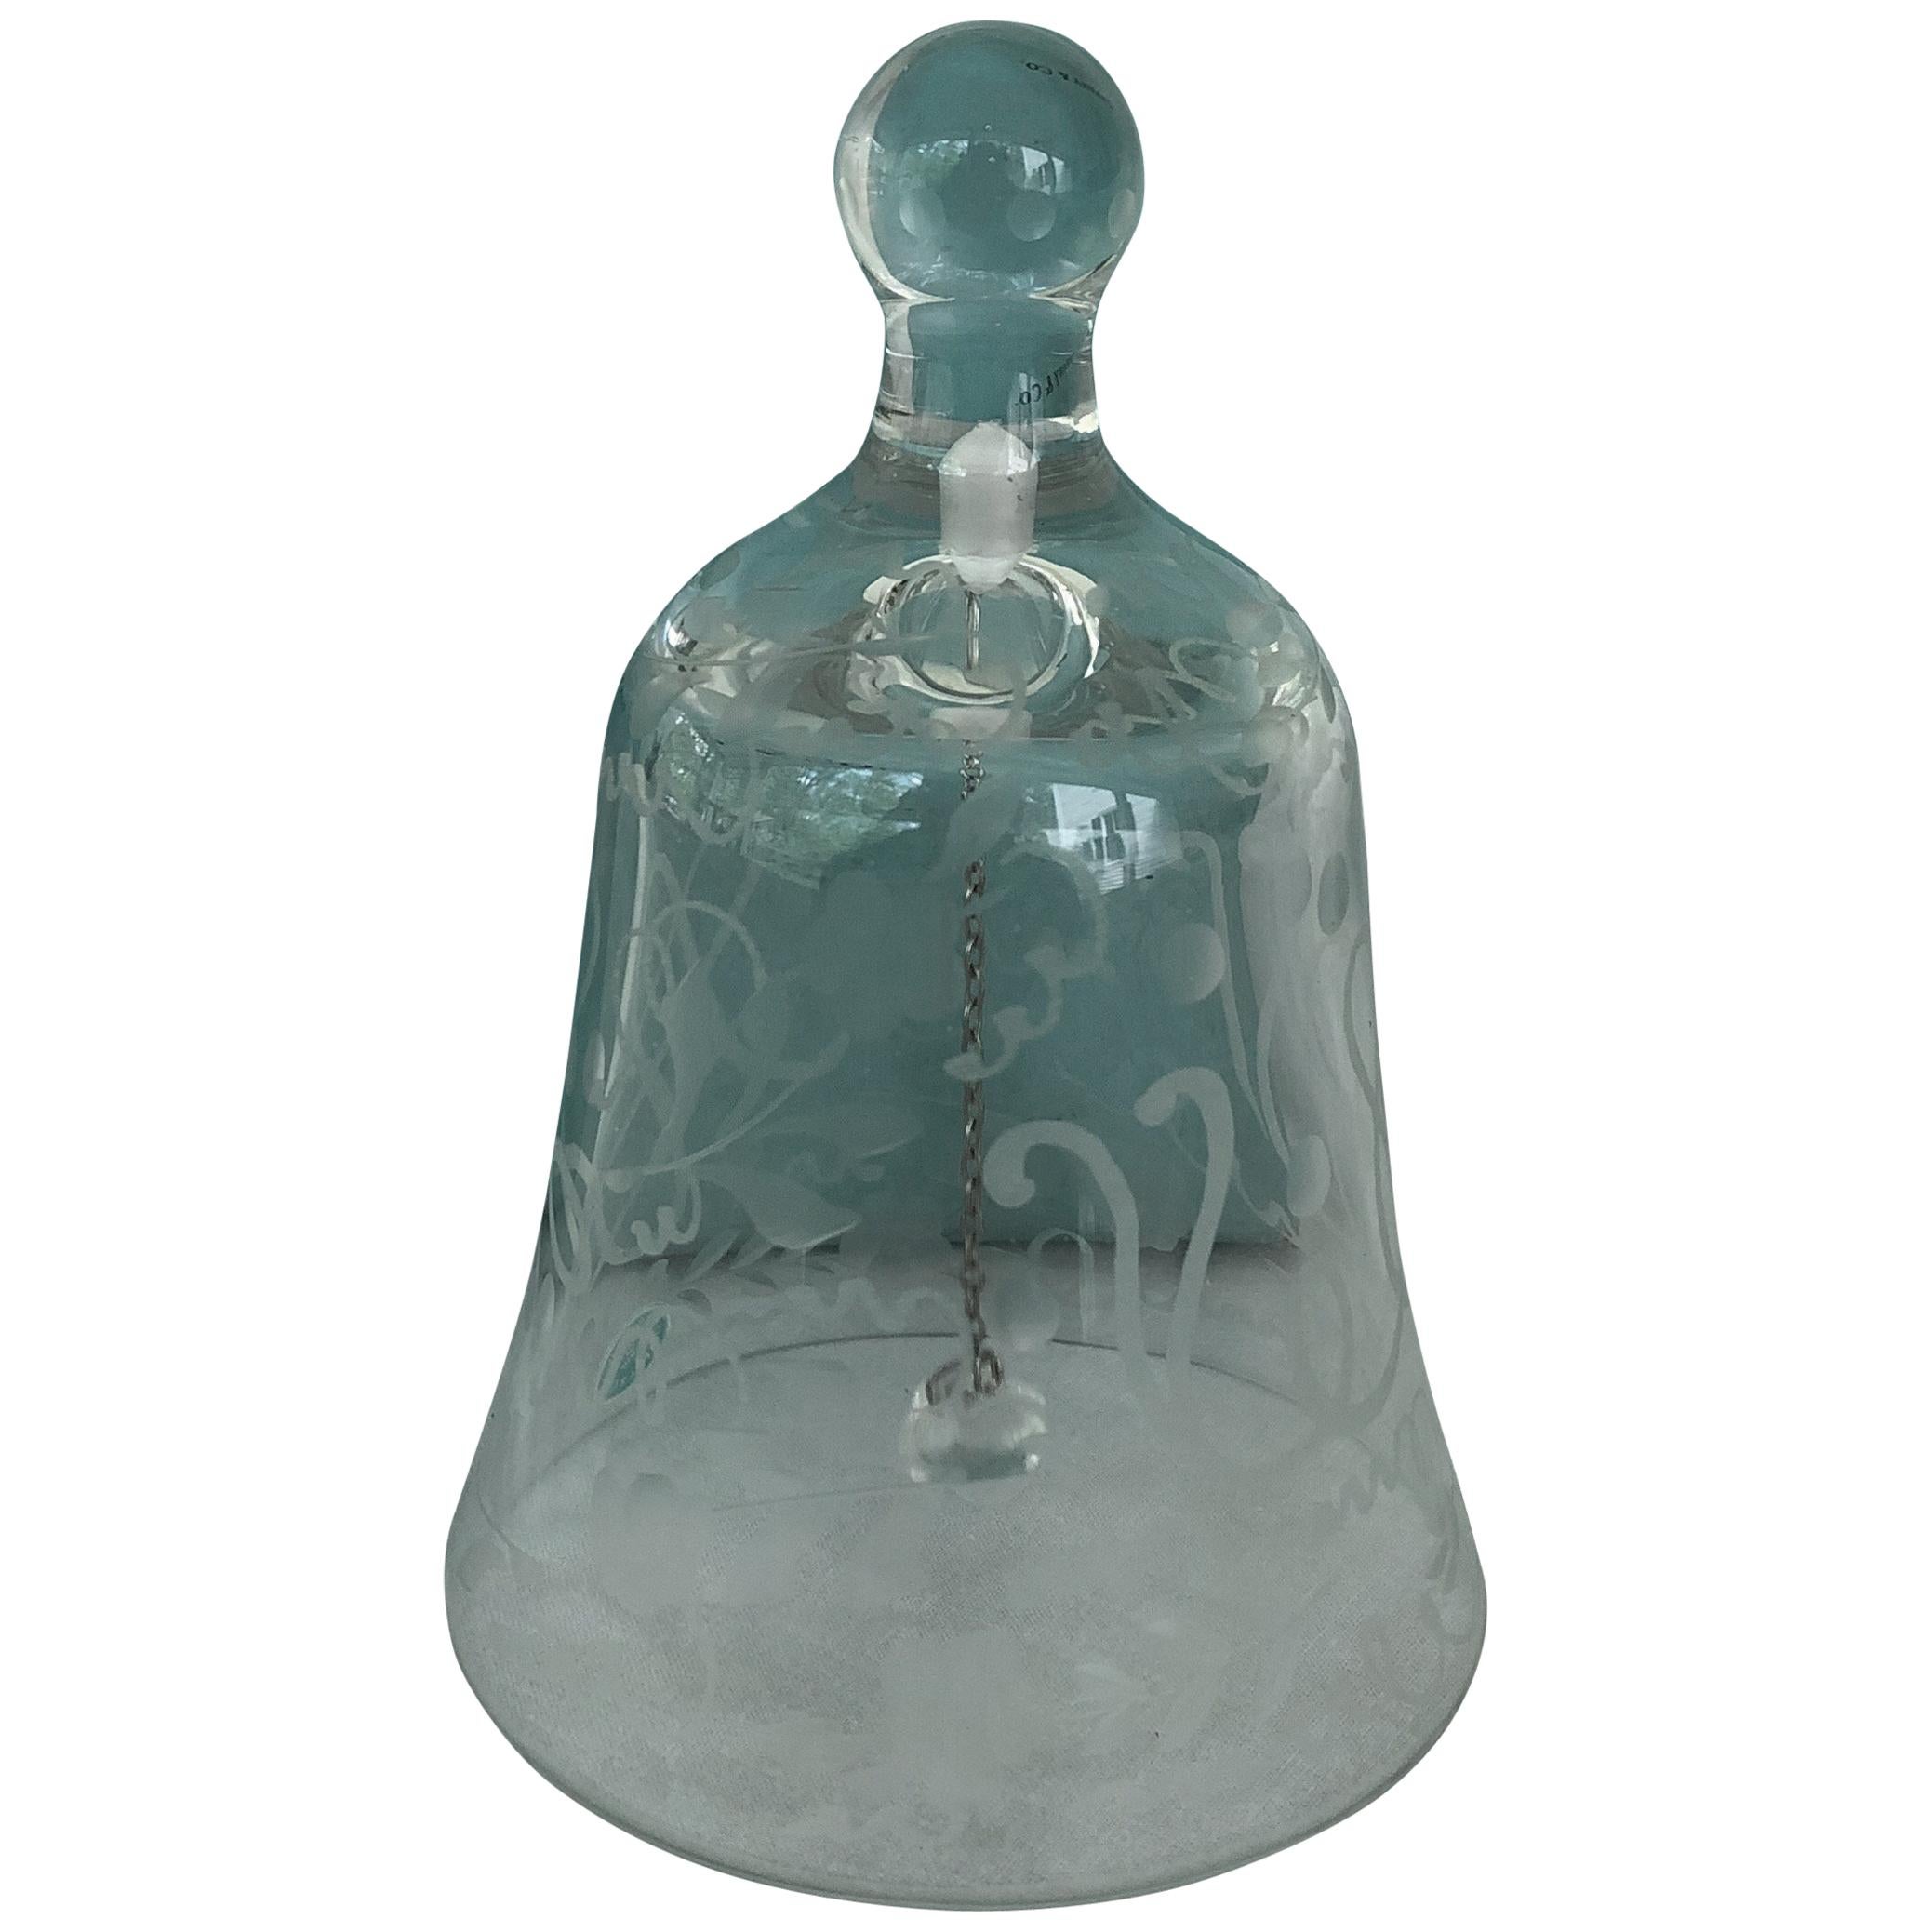  Tiffany & Company Etched Glass Dining Room Service Bell For Sale